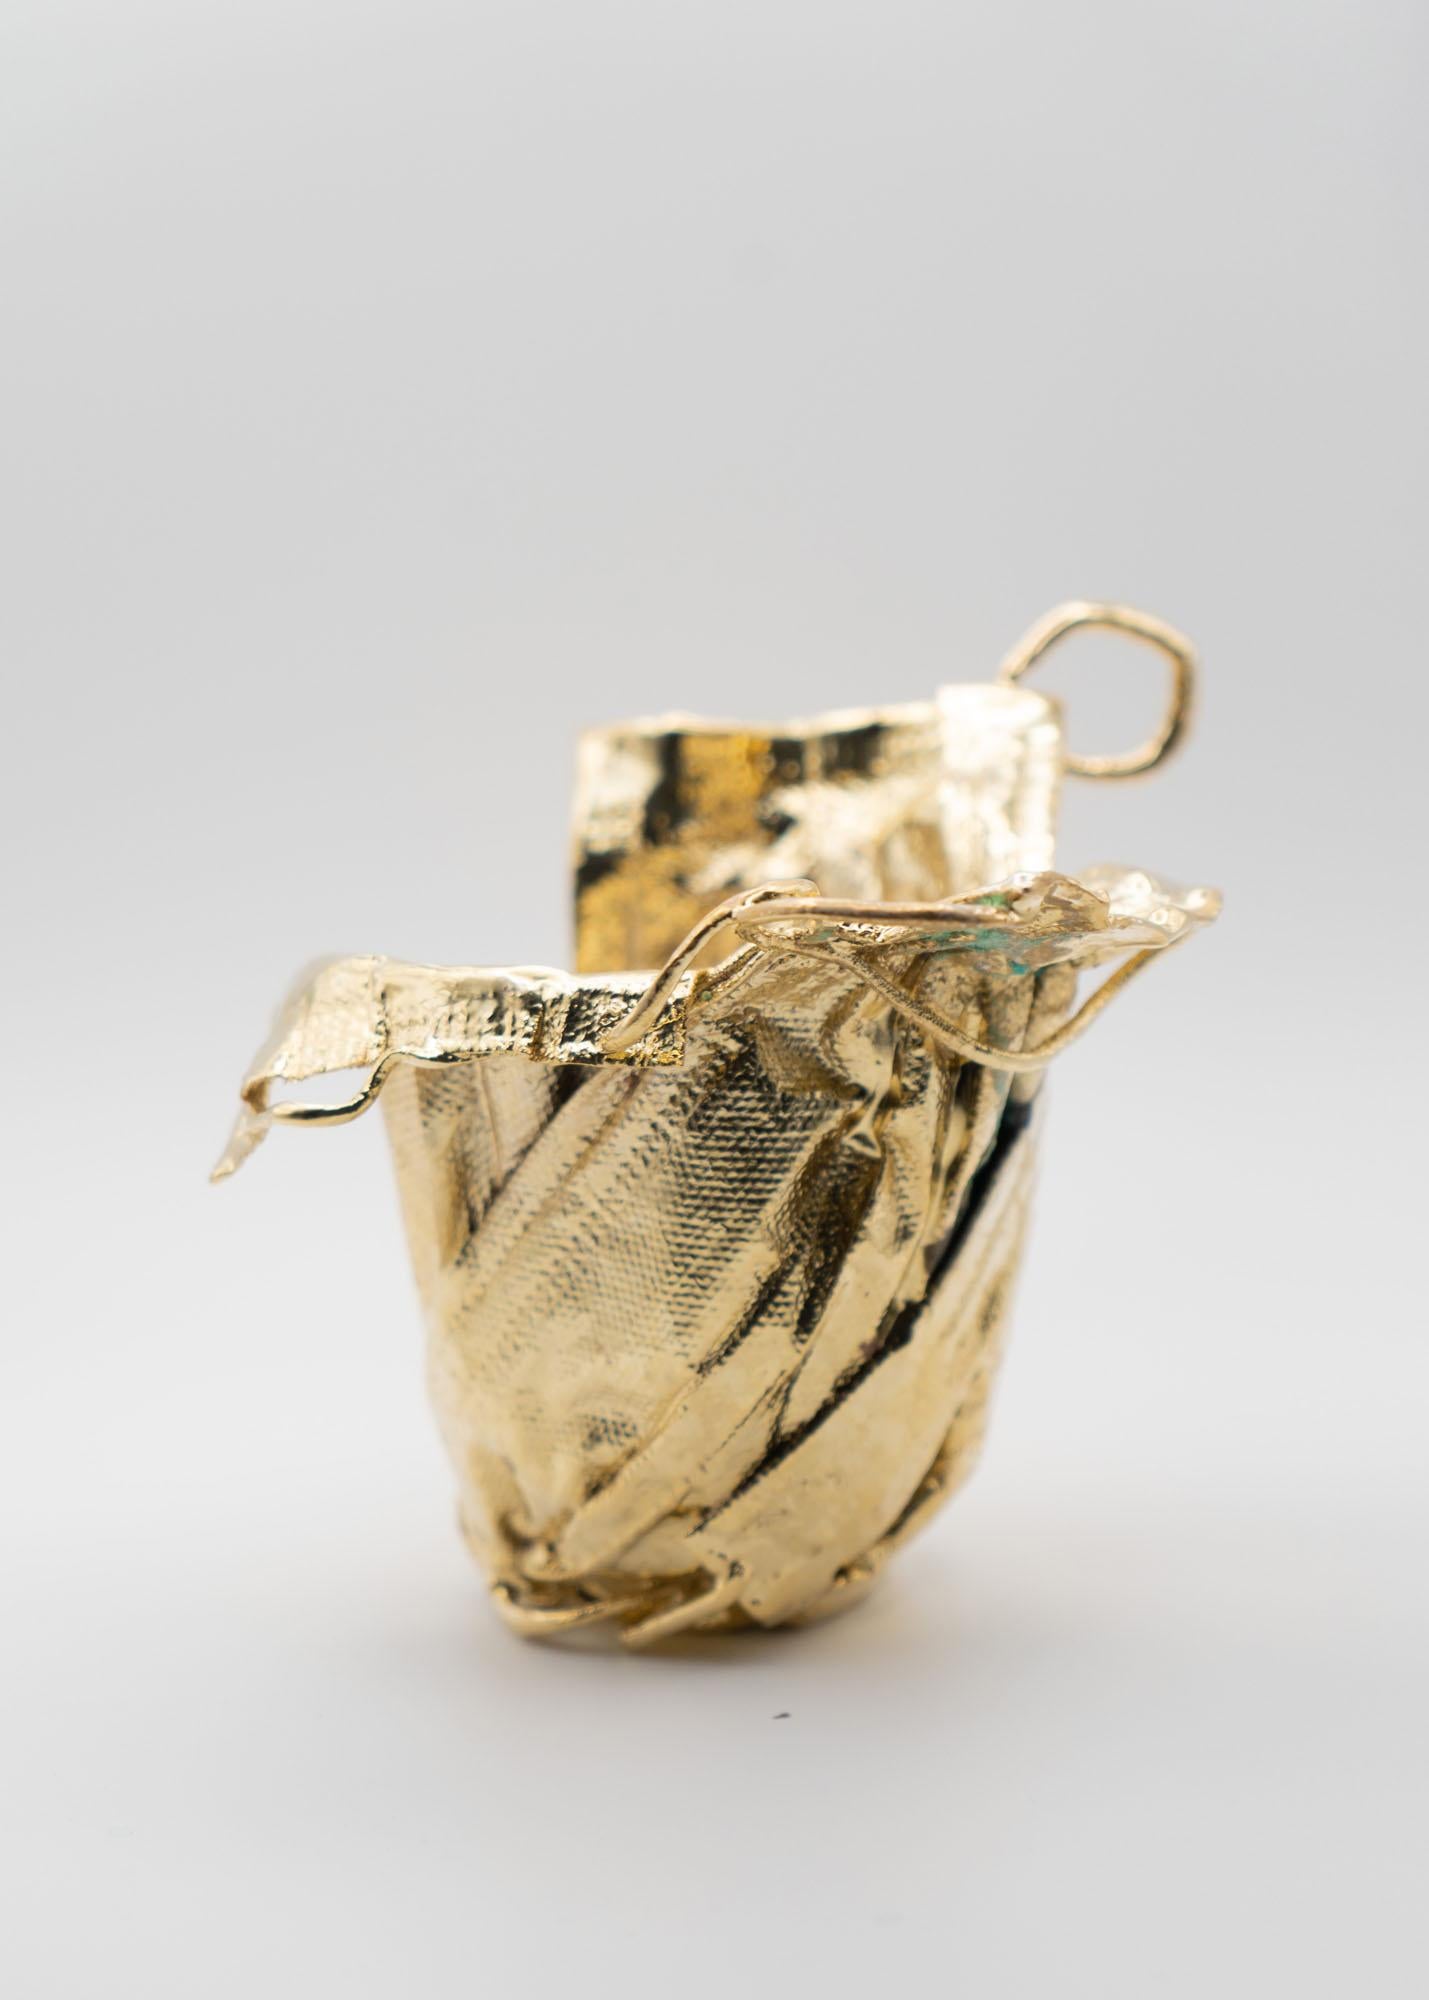 Galvanized Remask Act 015 Gold Art Object Made from Surgical Mask by Enrico Girotti For Sale